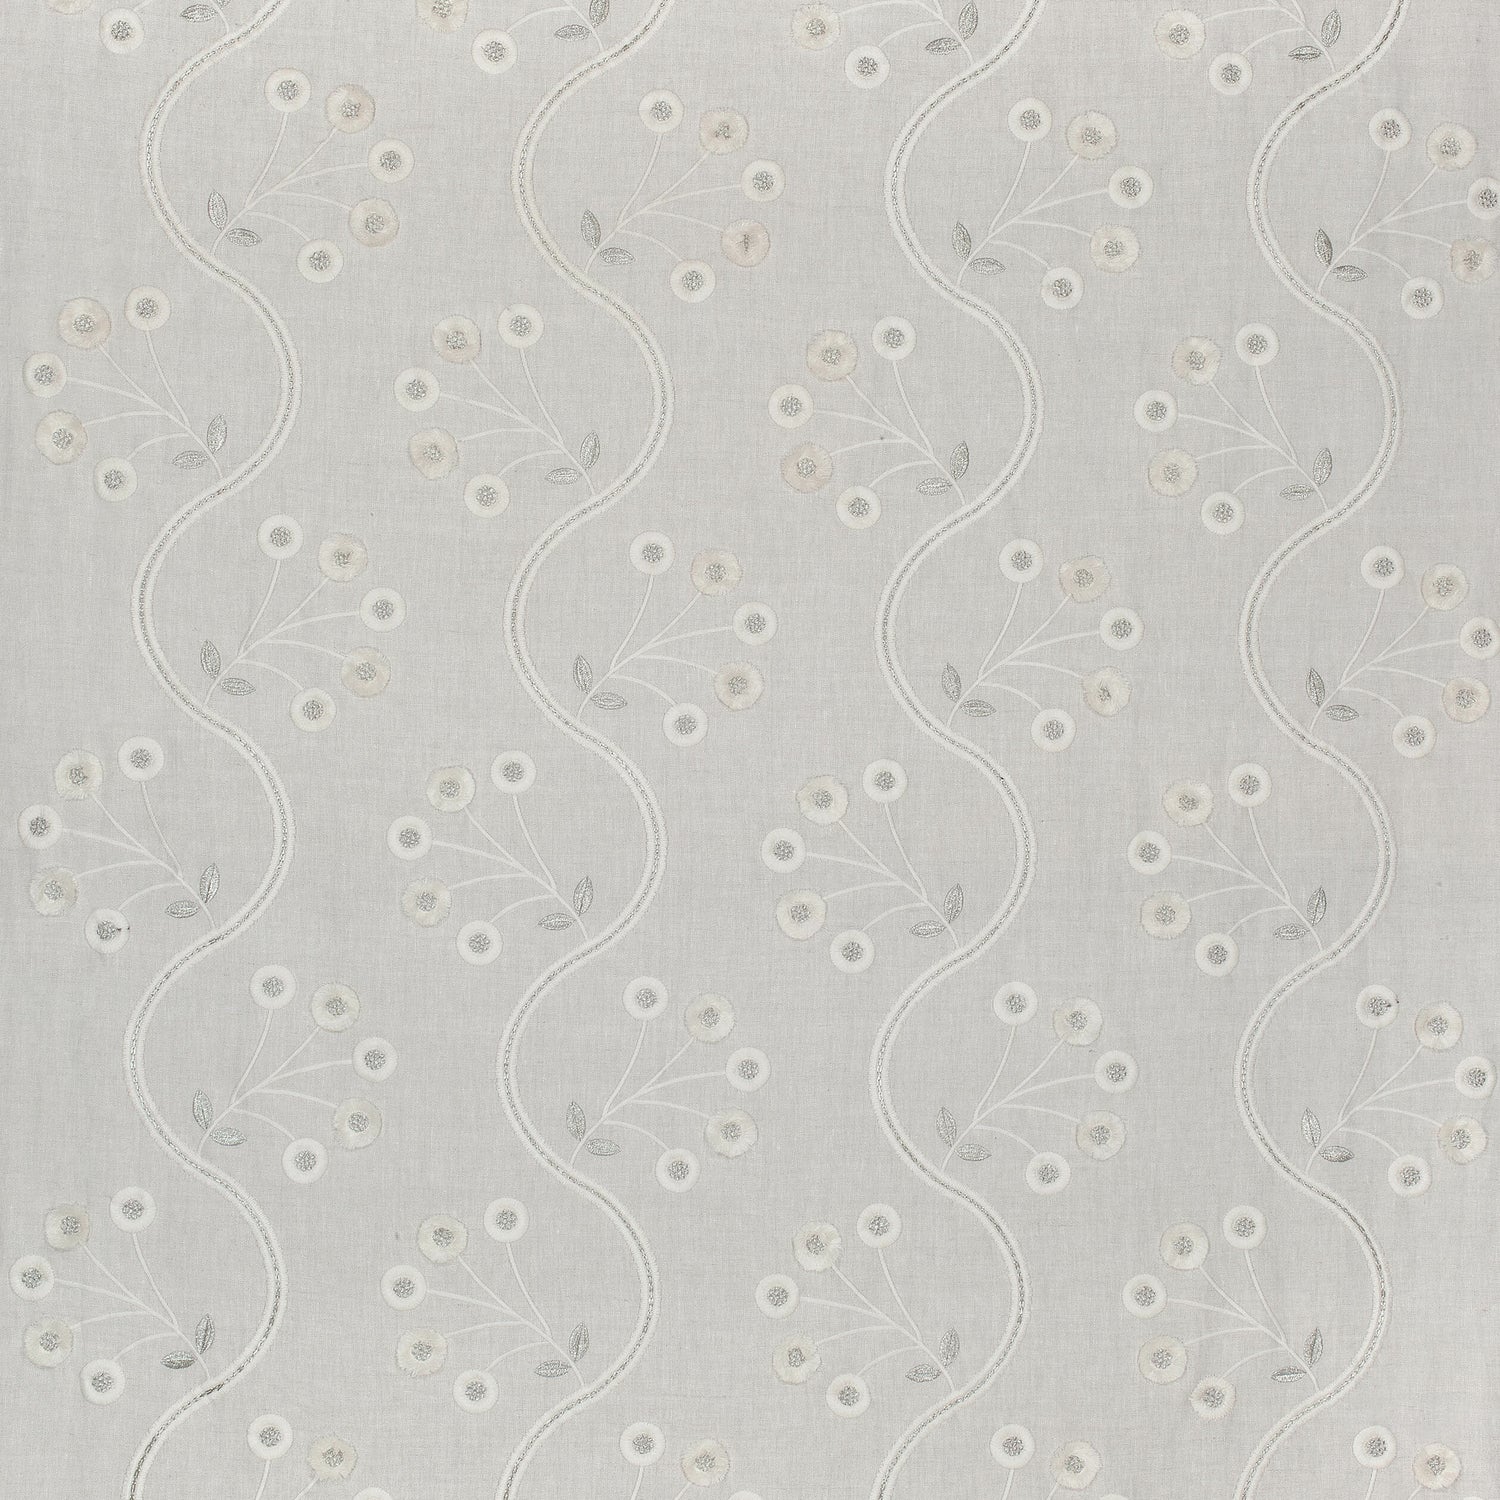 Olympus Embroidery fabric in natural color - pattern number AW9100 - by Anna French in the Natural Glimmer collection